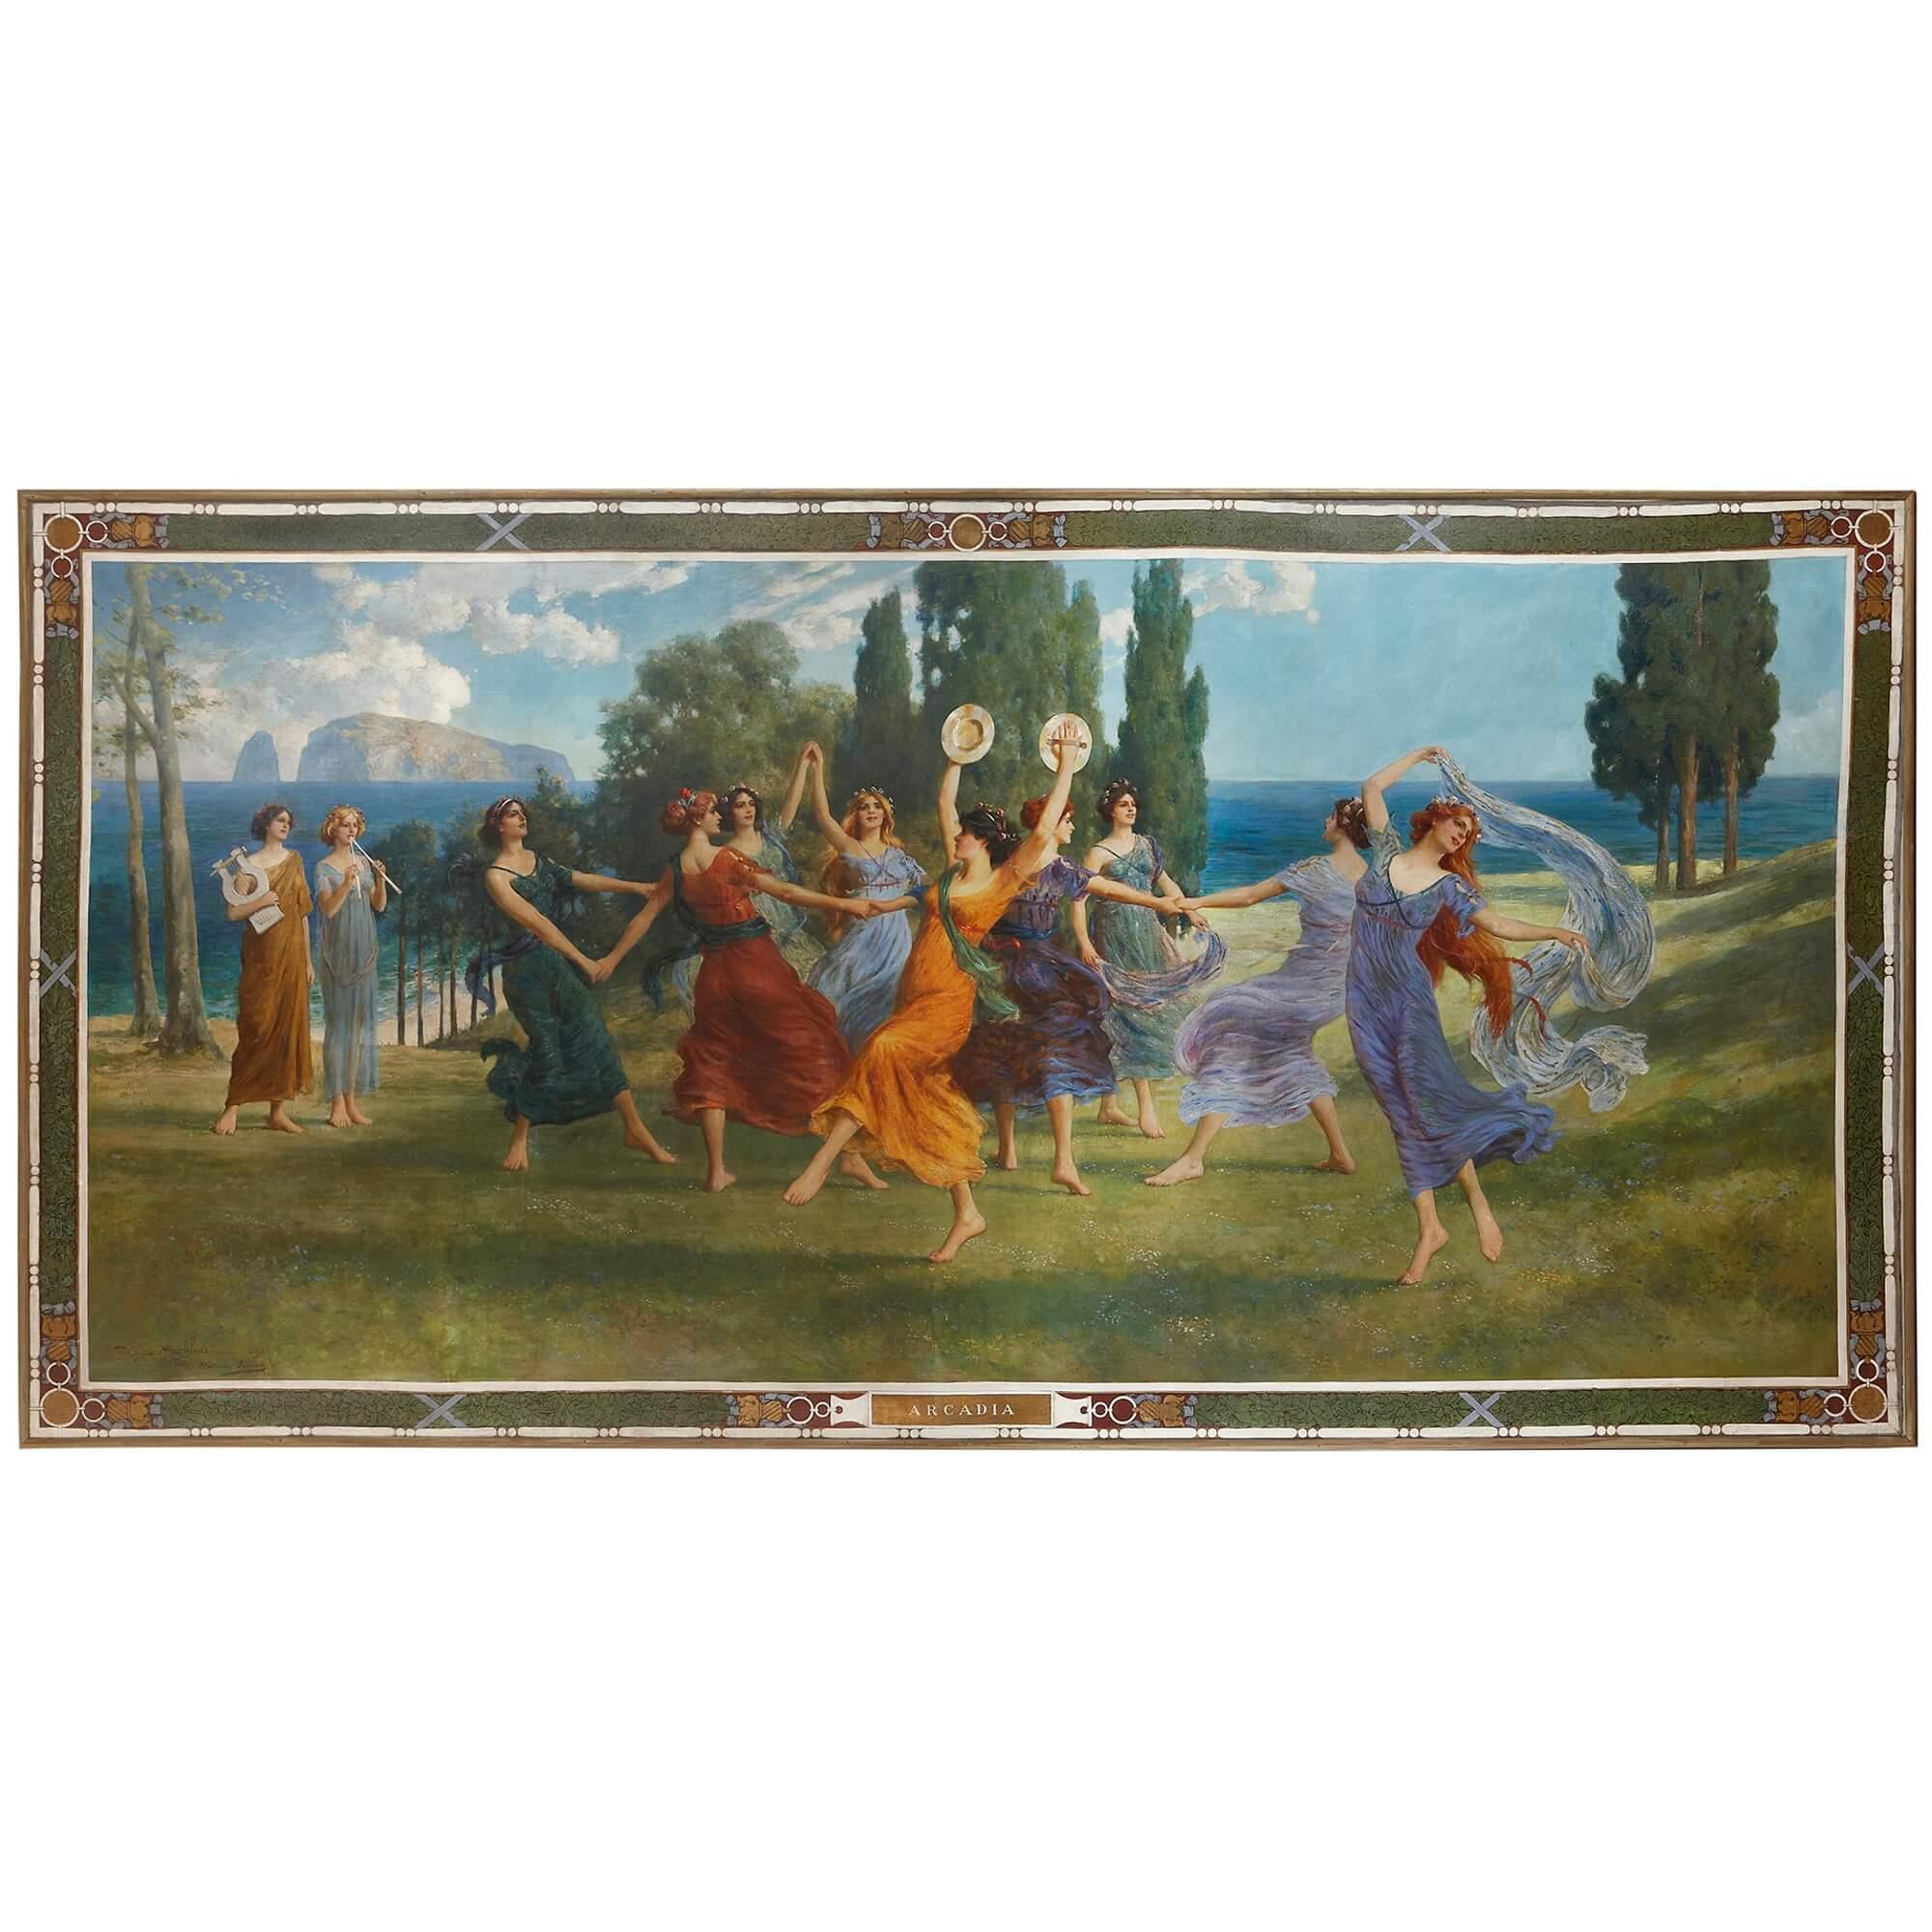 Thomas Eyre Macklin Landscape Painting - 'Arcadia, ' a very large British Neoclassical Arts & Crafts painting